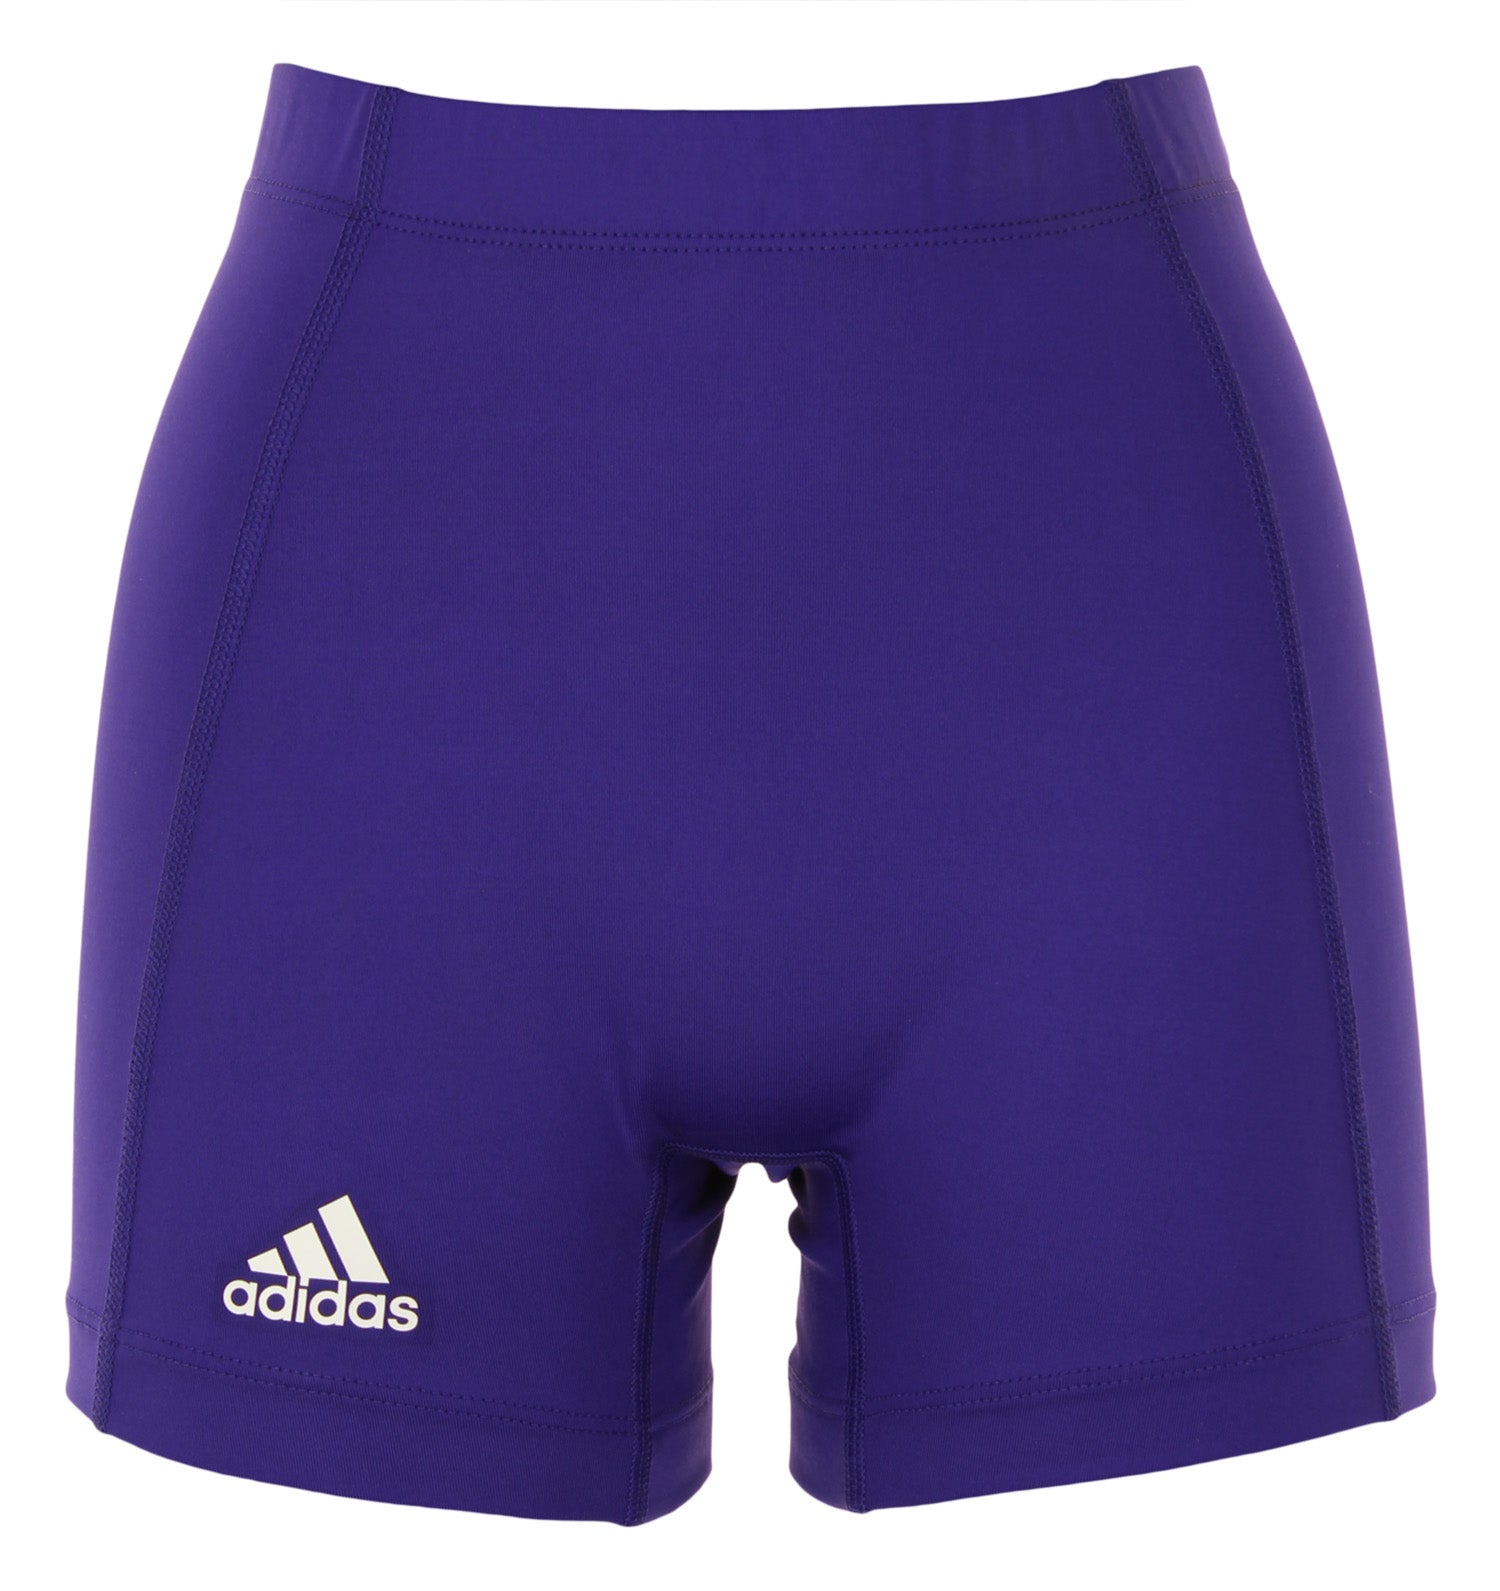 Adidas Women's Techfit Volleyball Tights